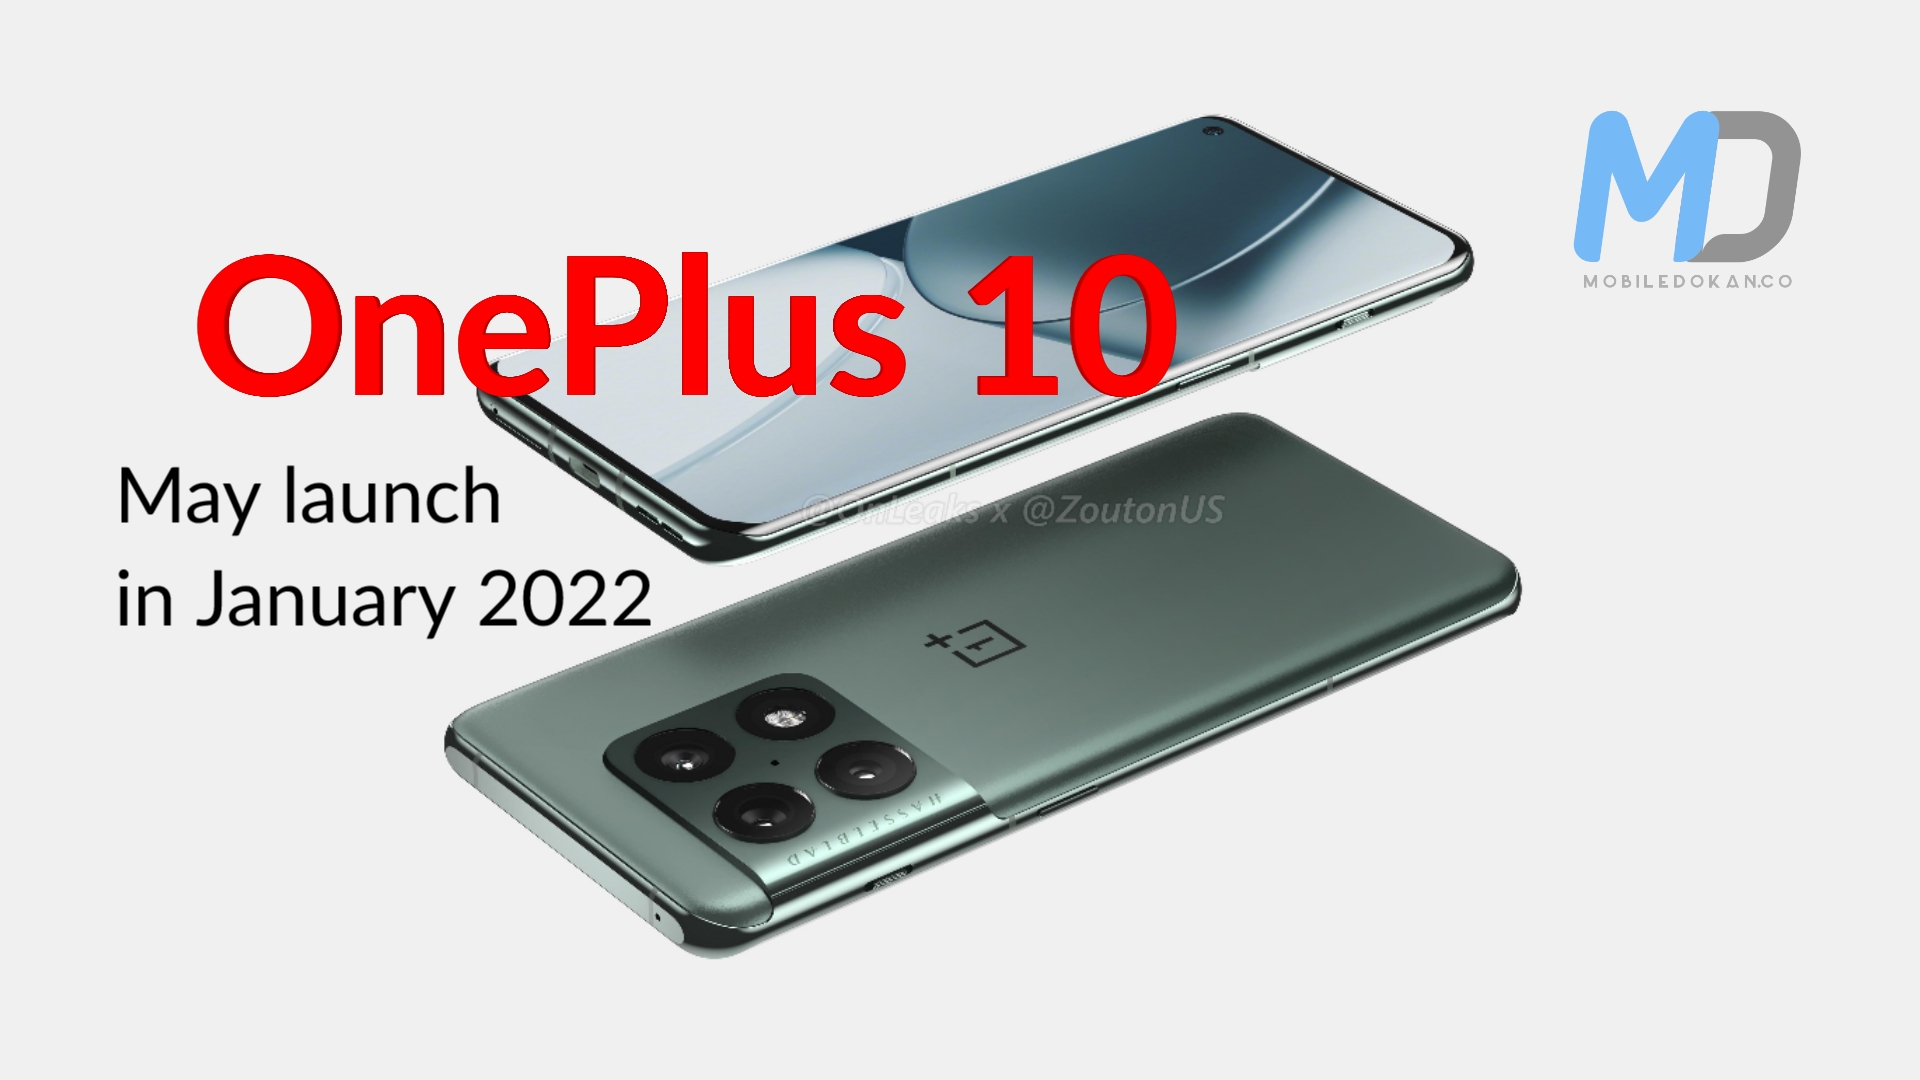 OnePlus 10 may launch in January 2022 earlier